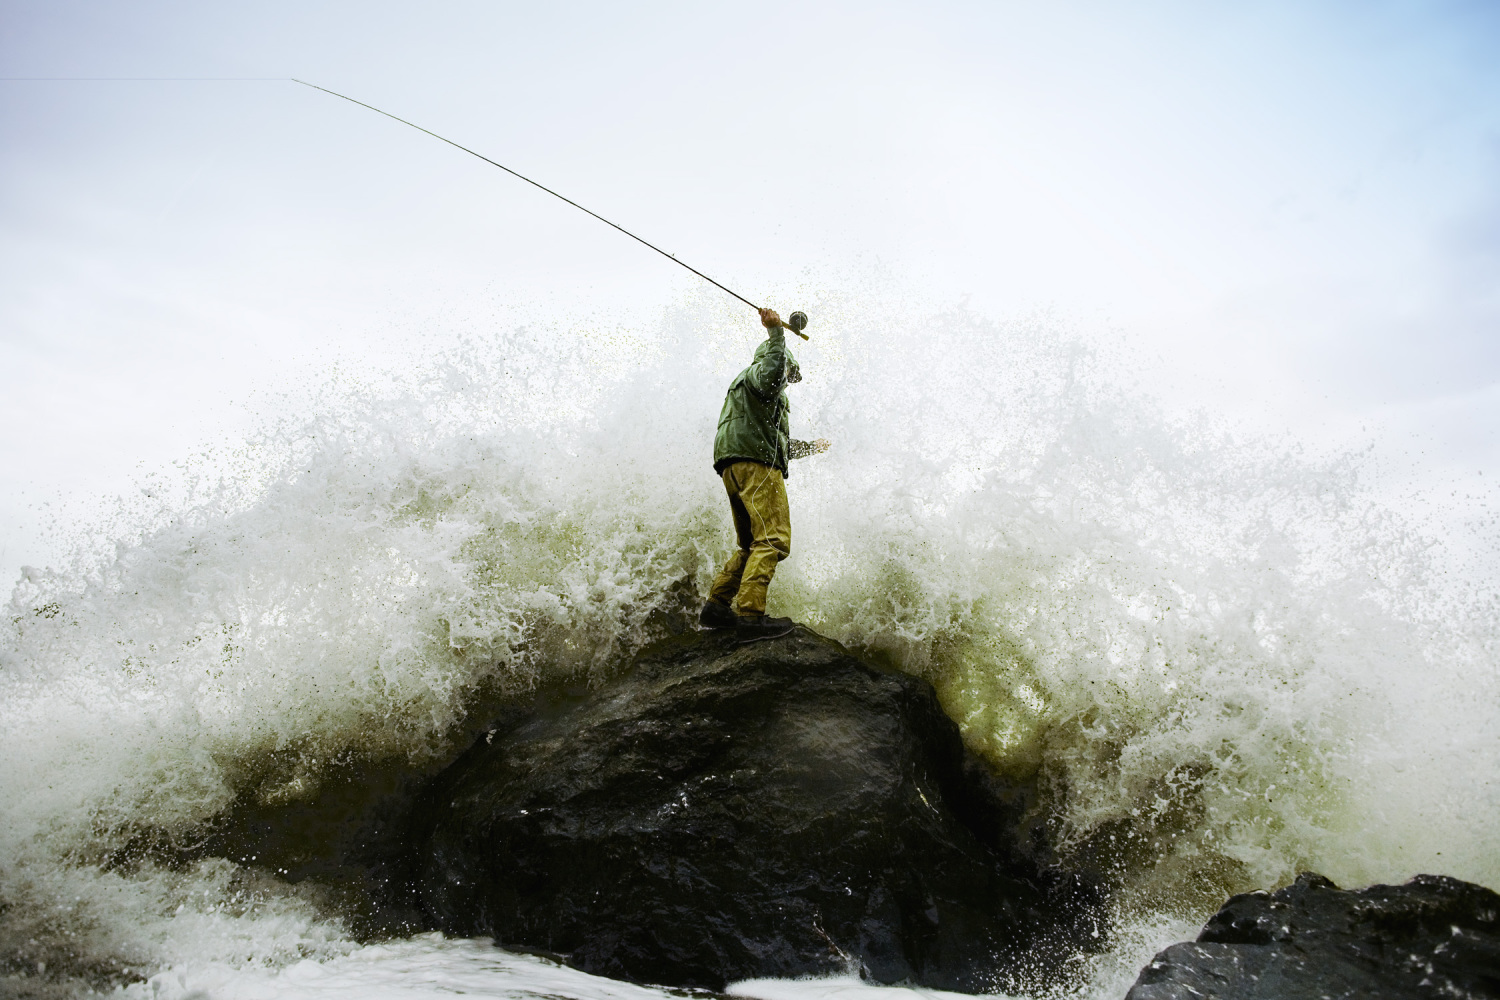 Fishing for Photographs: A Collection of Coastal Angling Images